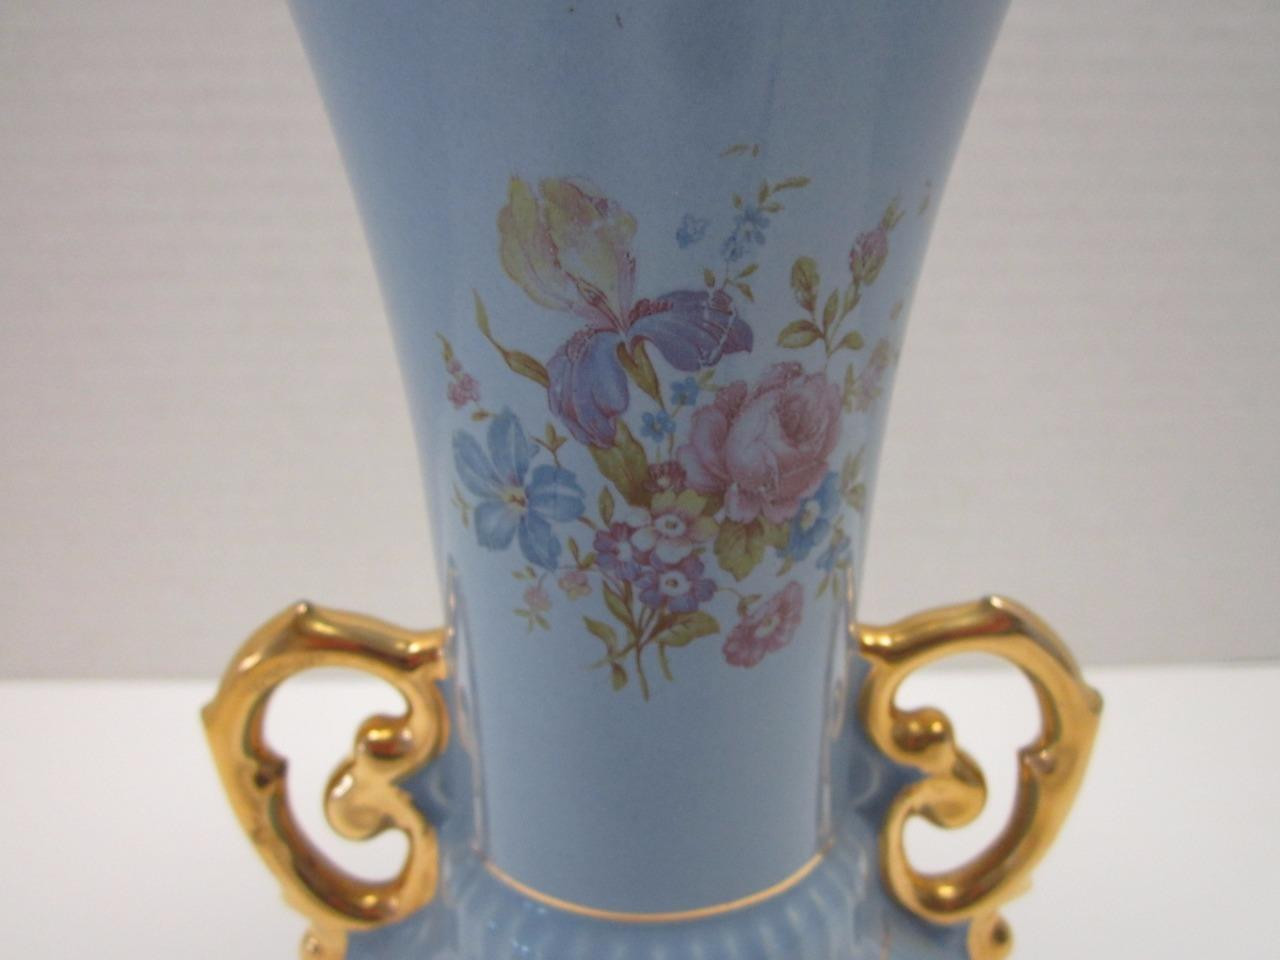 13 Recommended Abingdon Usa Pottery Vase 2024 free download abingdon usa pottery vase of vintage abingdon usa pottery vase blue art deco gilded trim with 1 of 5free shipping vintage abingdon usa pottery vase blue art deco gilded trim handles 520 8 5 